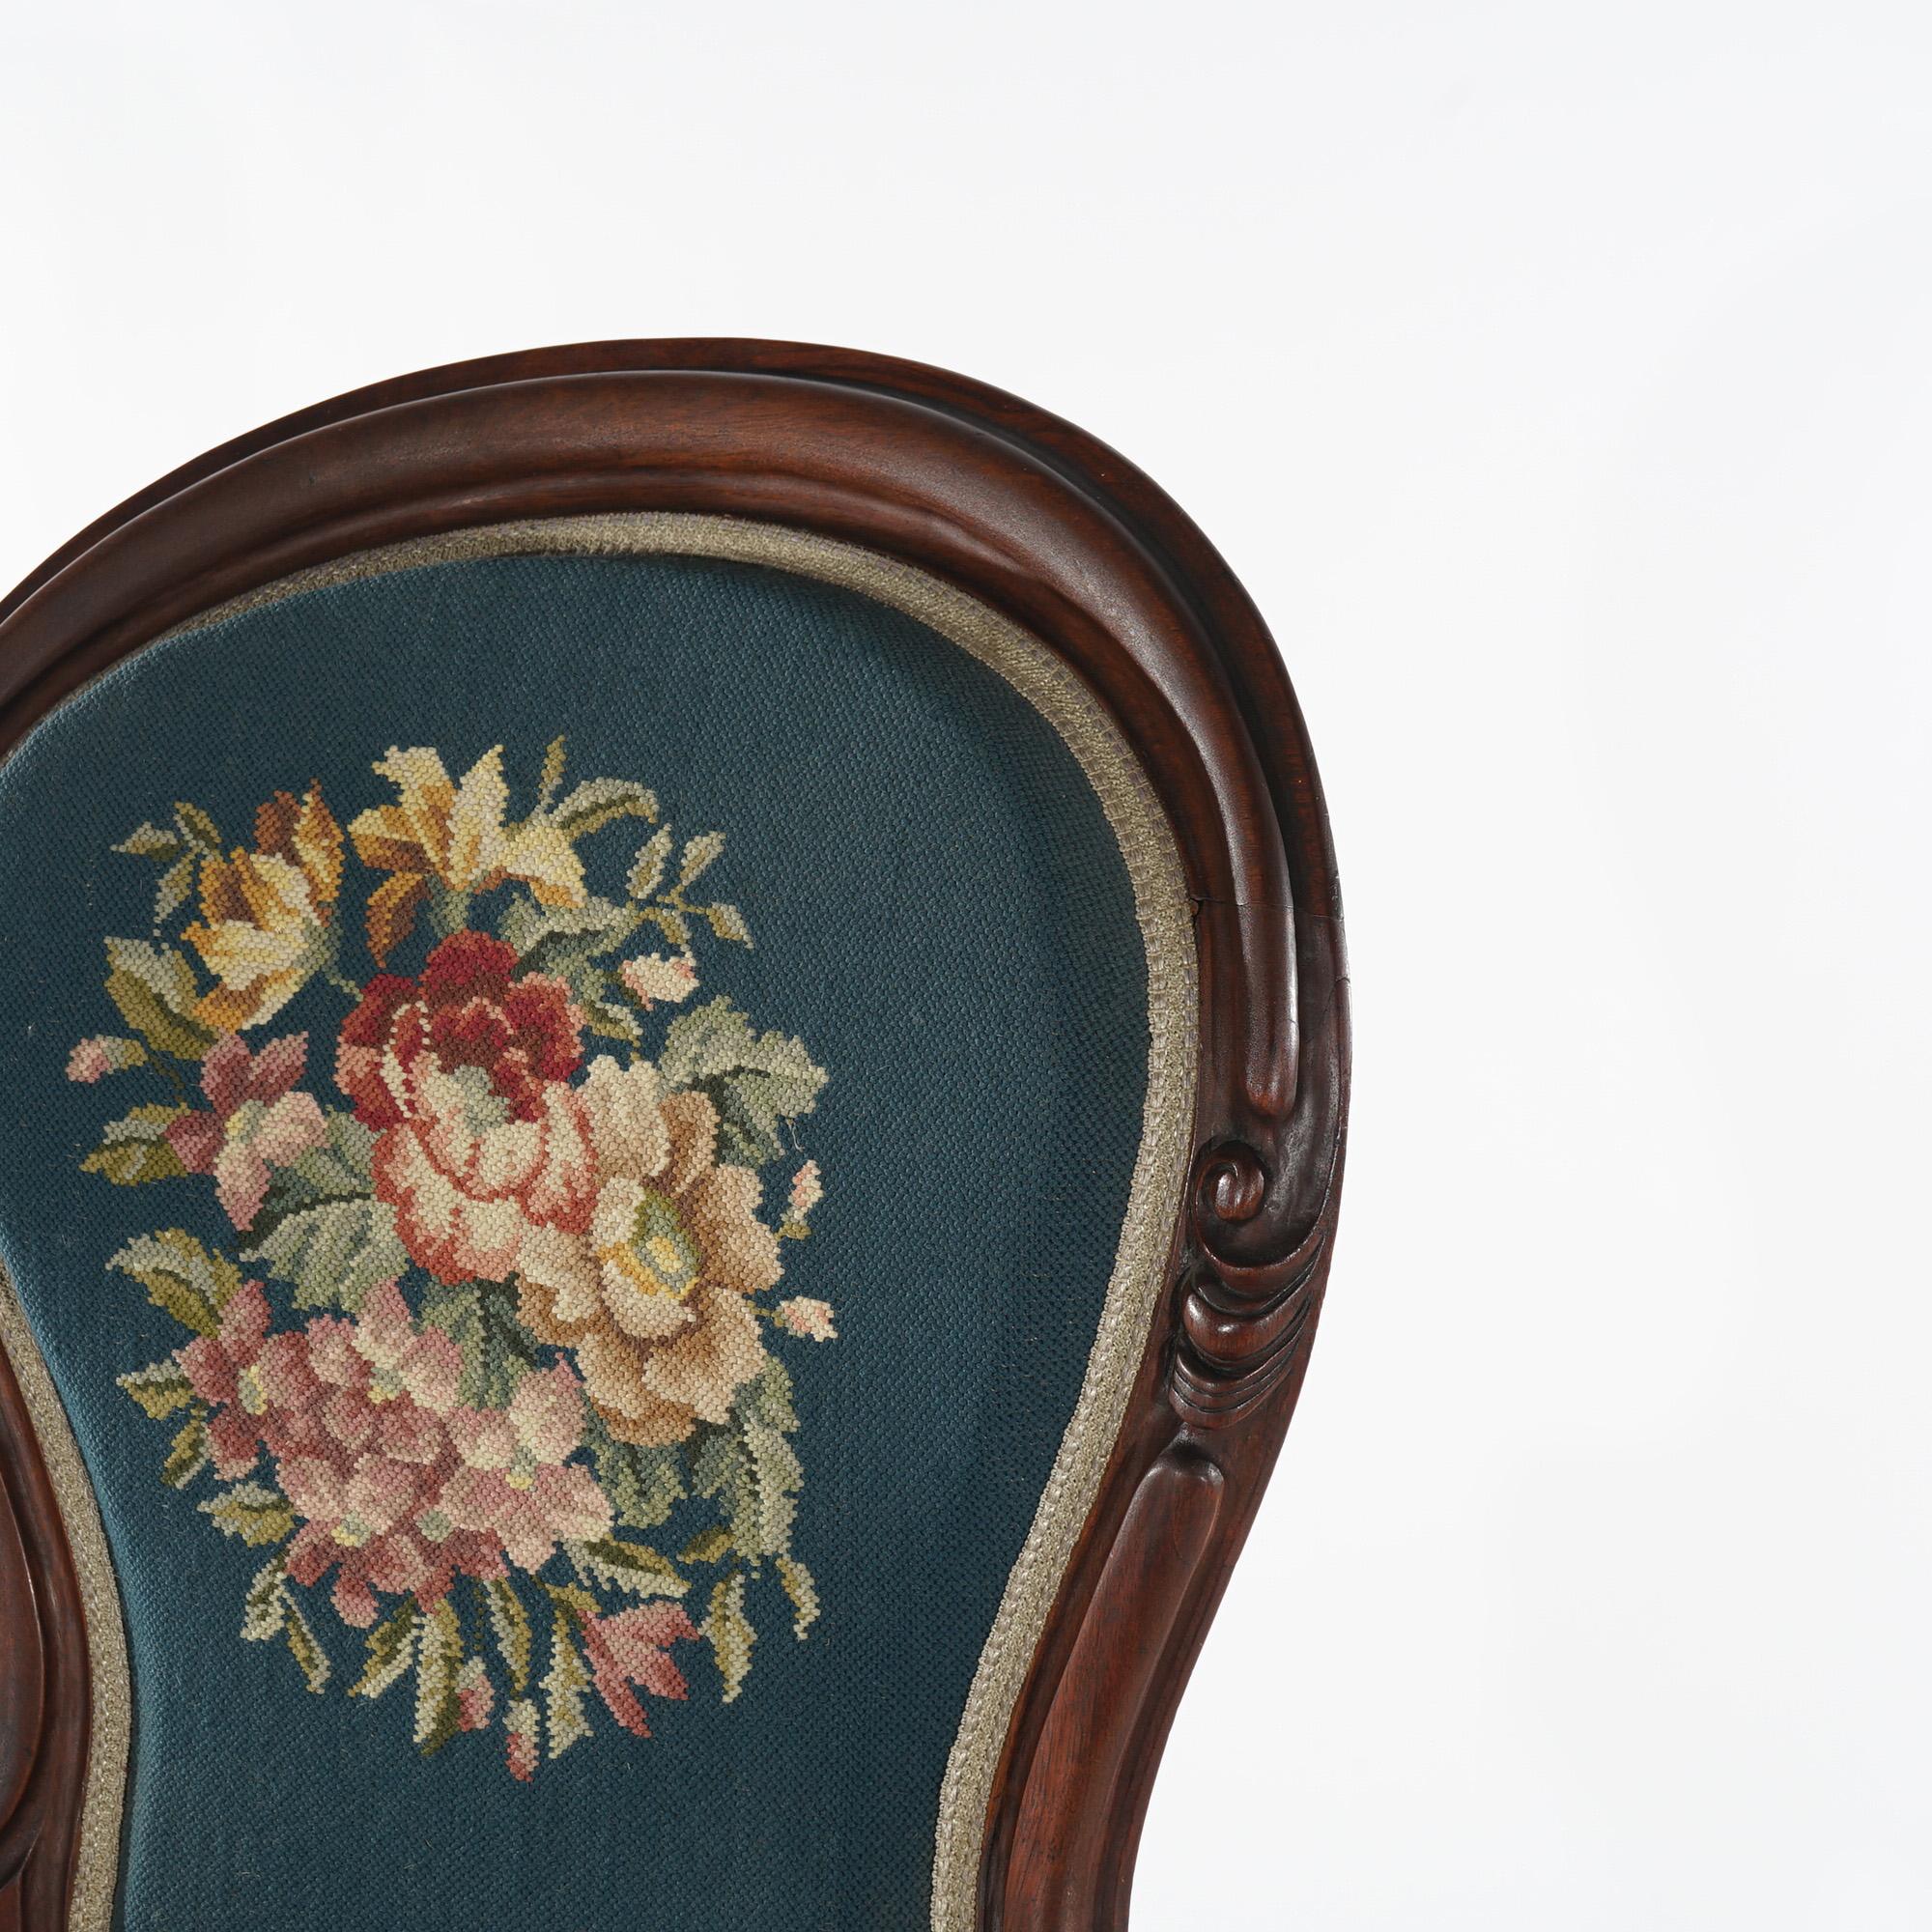 An antique Victorian ladies parlor chair offers carved walnut frame with shaped back having floral needlepoint upholstery, matching seat and covered arms; raised on cabriole legs; c1890

Measures - 39